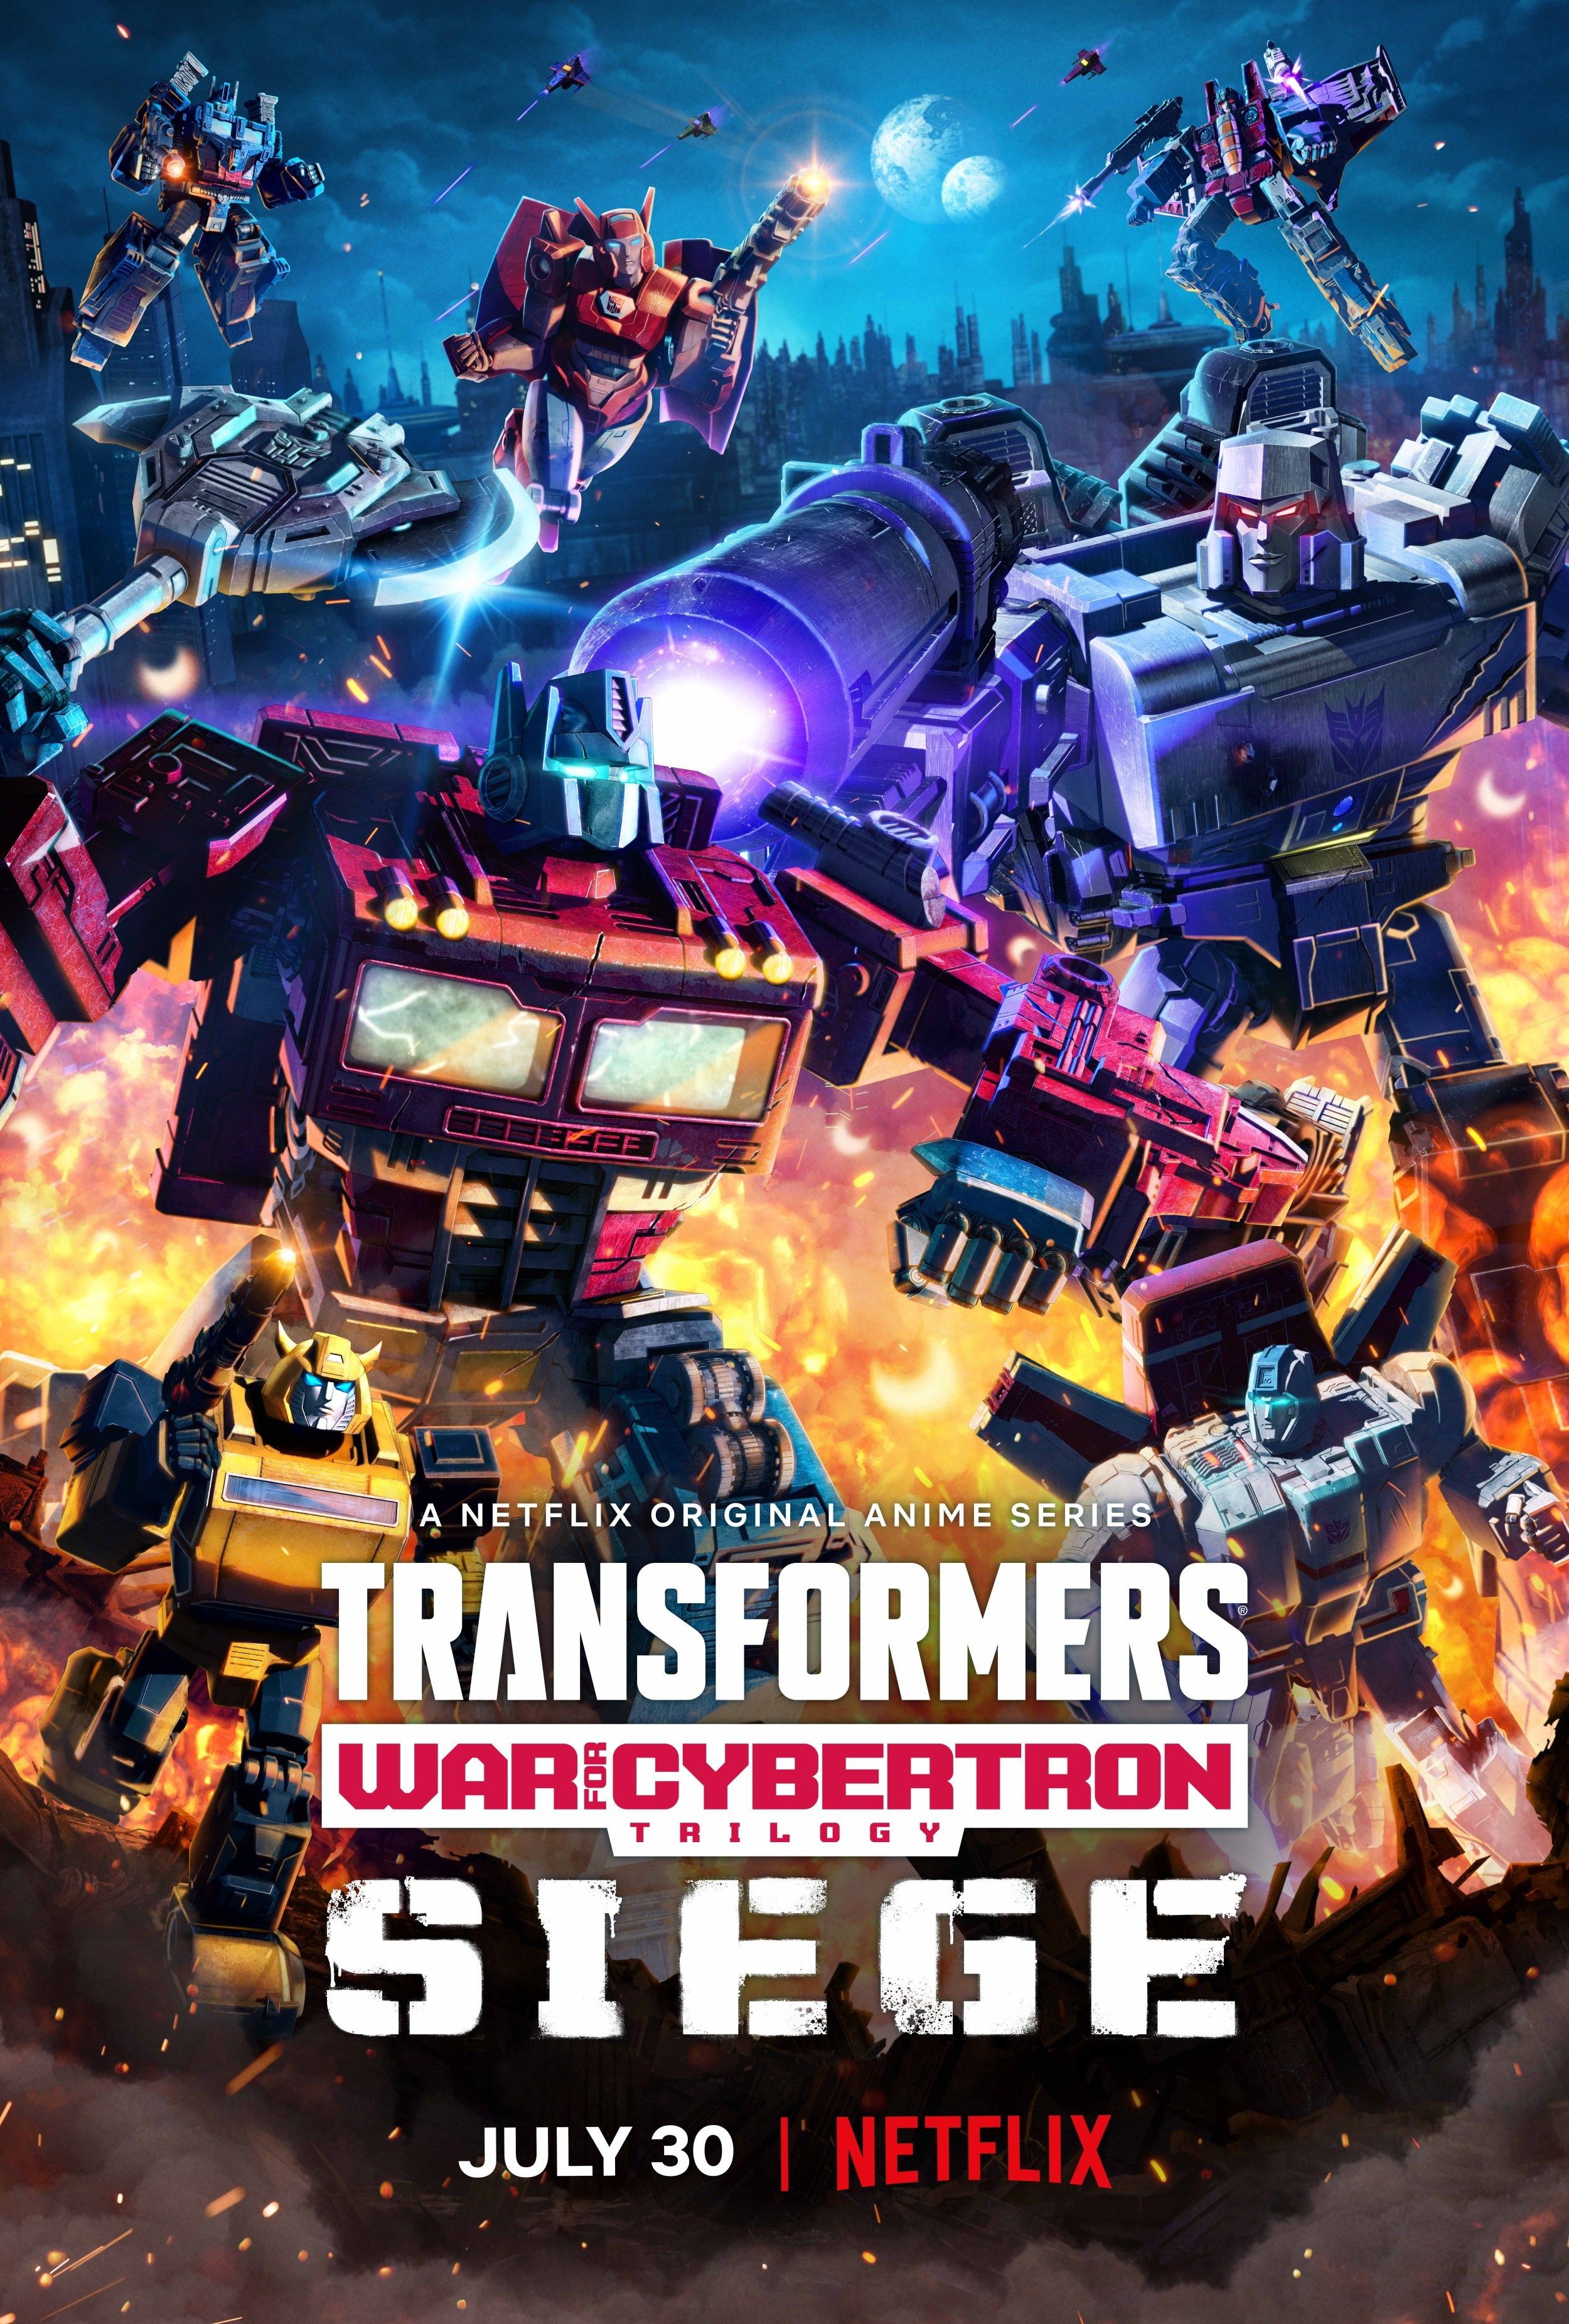 Transformers: War For Cybertron Trilogy. Teletraan I: The Transformers